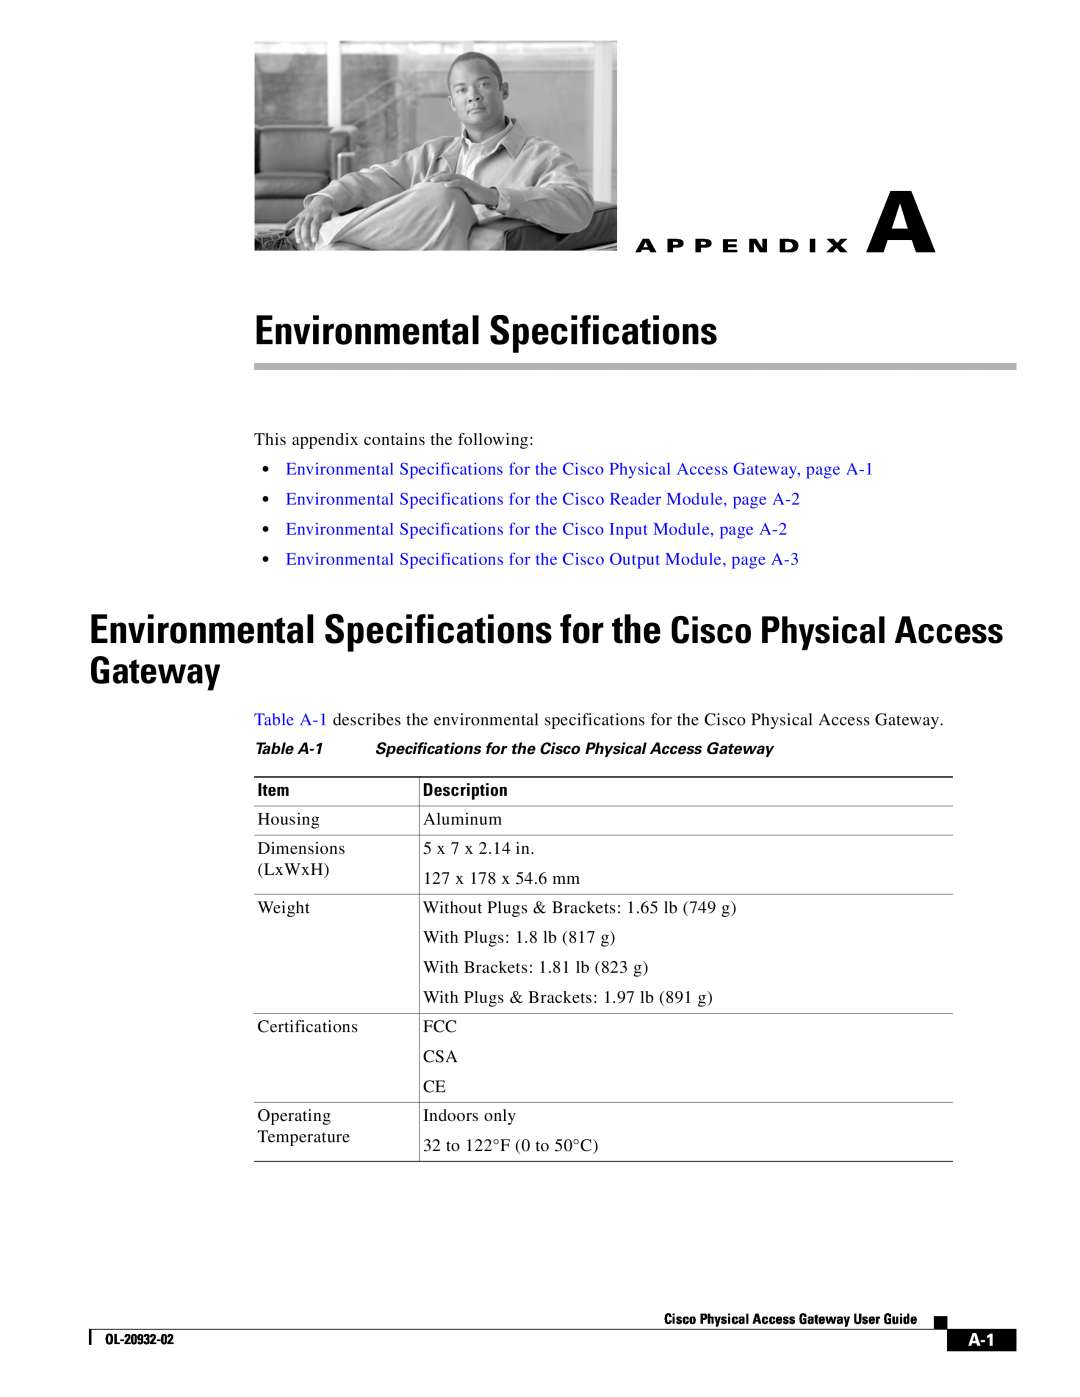 Cisco Systems OL-20932-02 manual Environmental Specifications, Gateway, A P P E N D I X A 